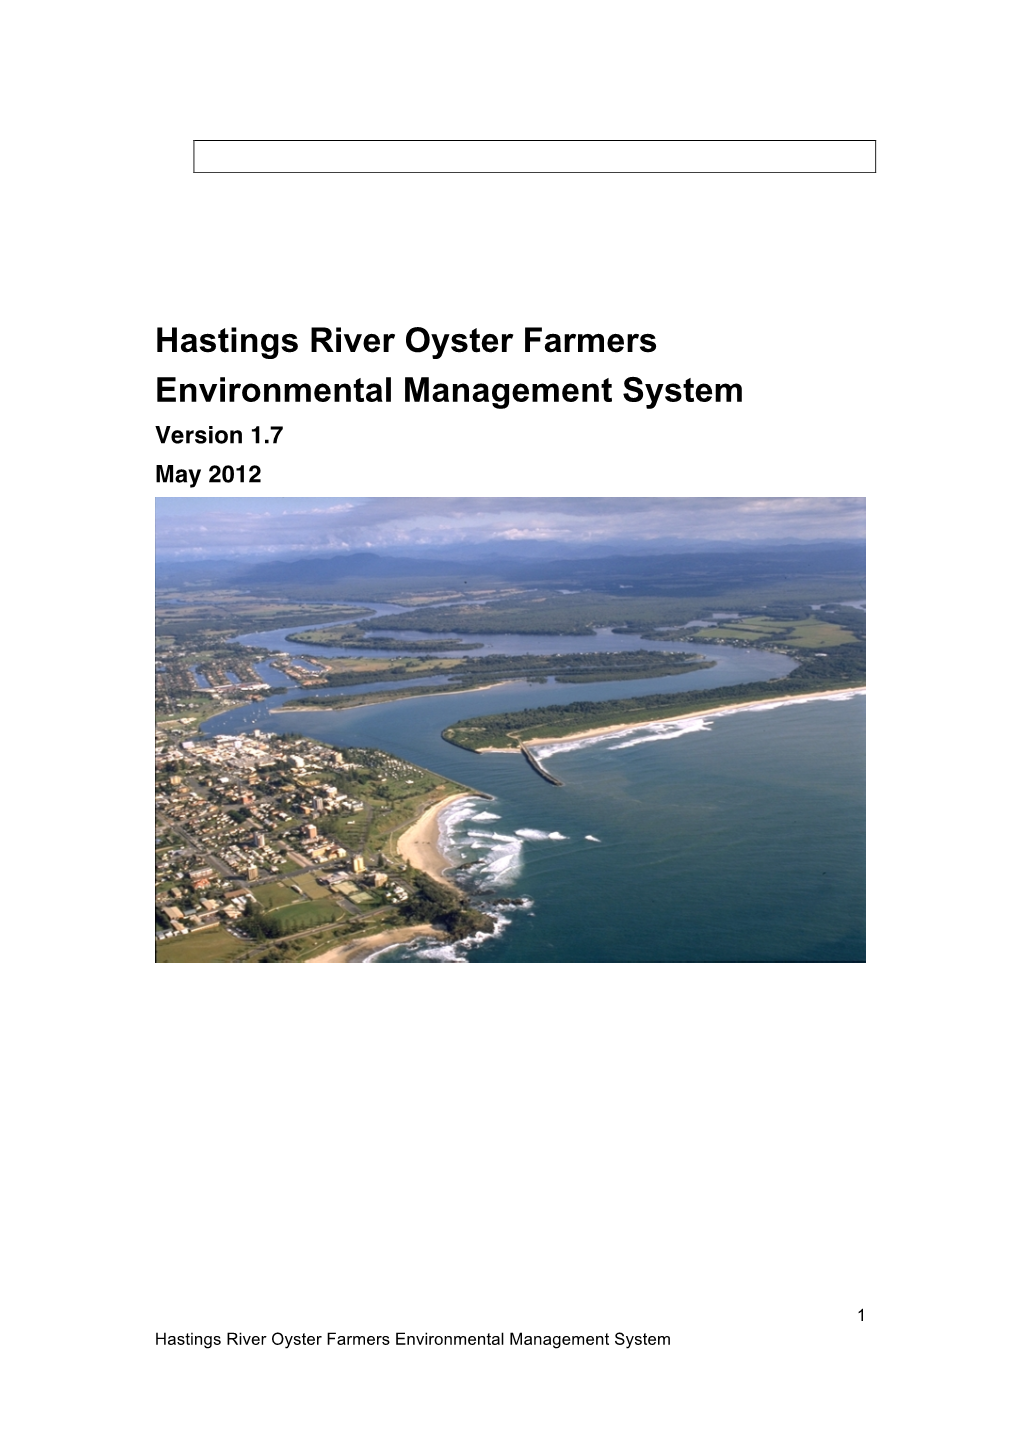 Hastings River Oyster Farmers Environmental Management System Version 1.7 May 2012